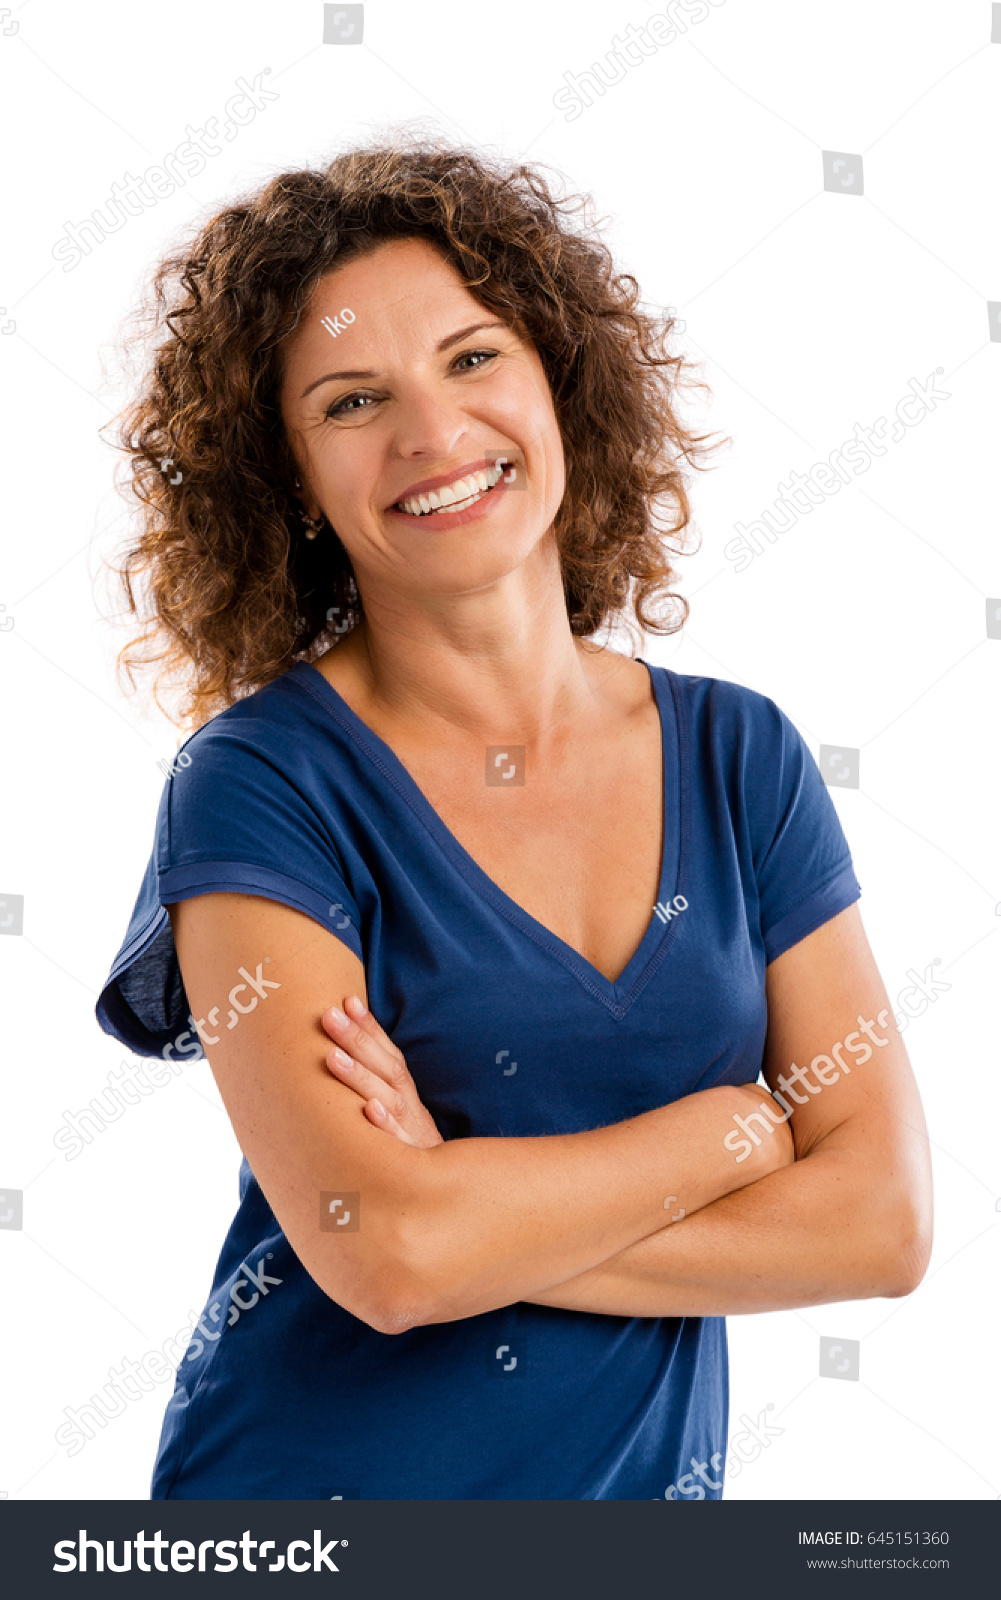 Smiling middle aged woman with arms folded, isolated on white background #645151360